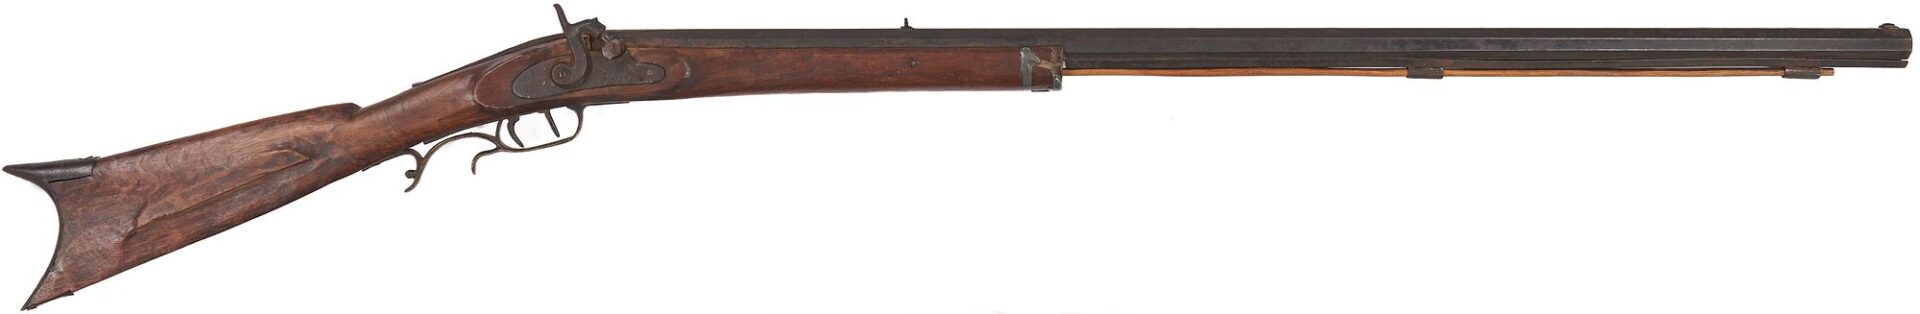 Lot 530: Two (2) Half Stock Percussion Rifles, One Marked Brunker